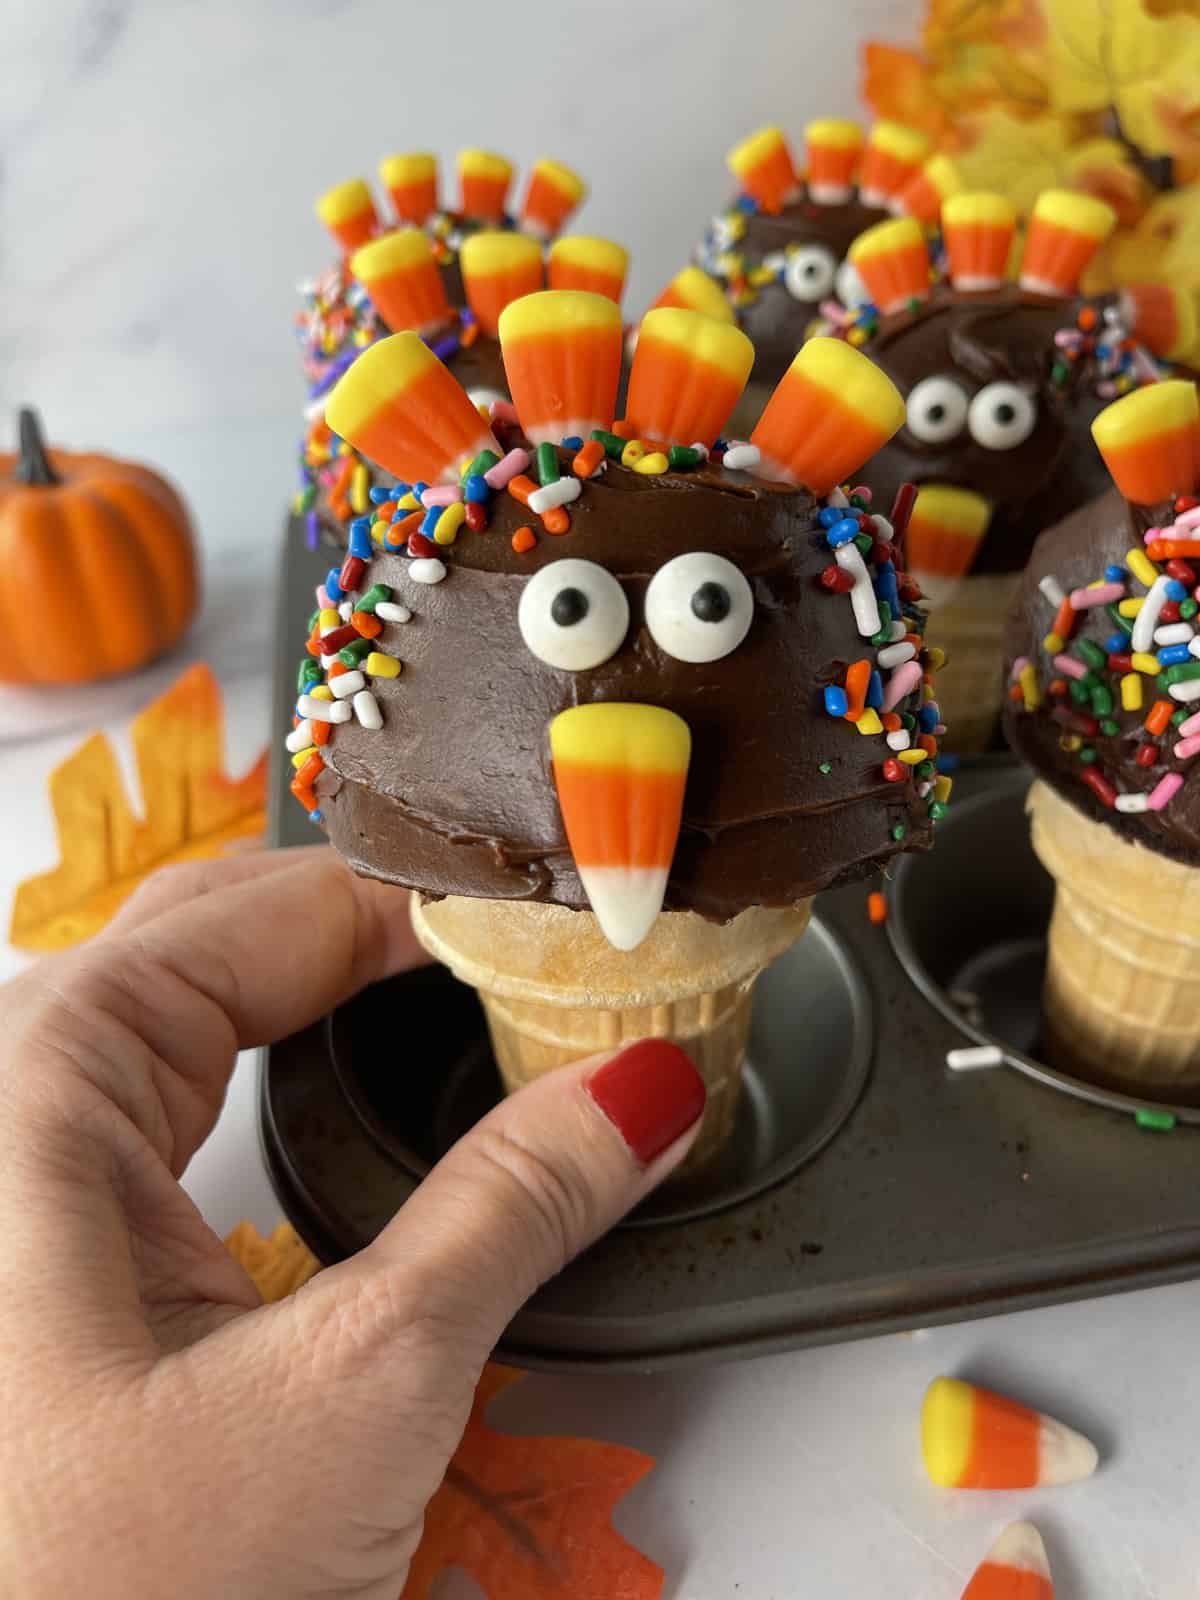 Cupcake baked in ice cream cone then decorated to look like a cute turkey with candy corn feathers.